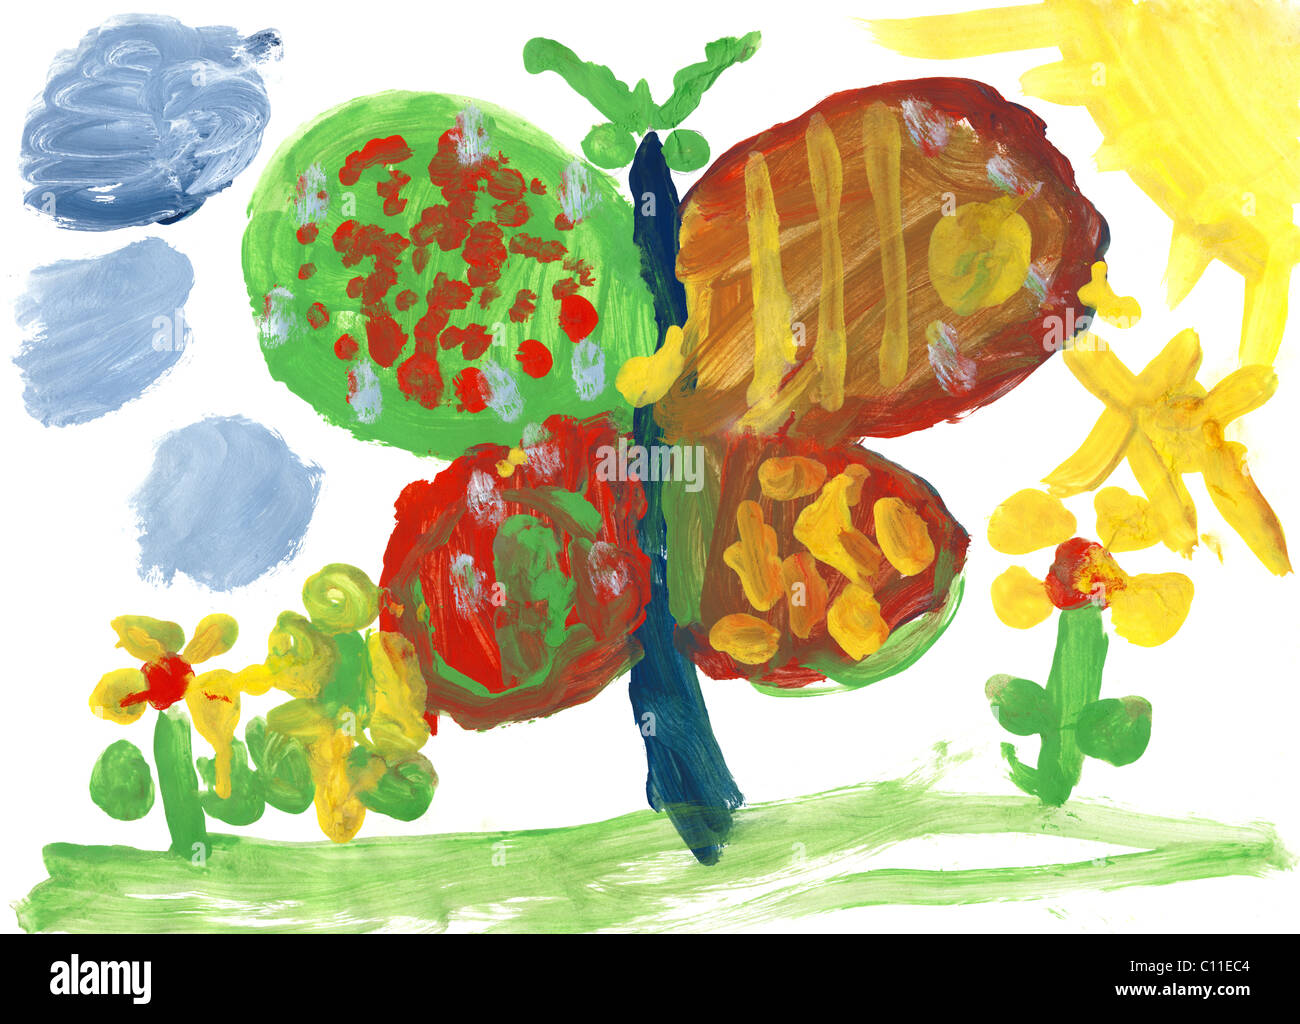 Children drawing - big butterfly and flowers Stock Photo